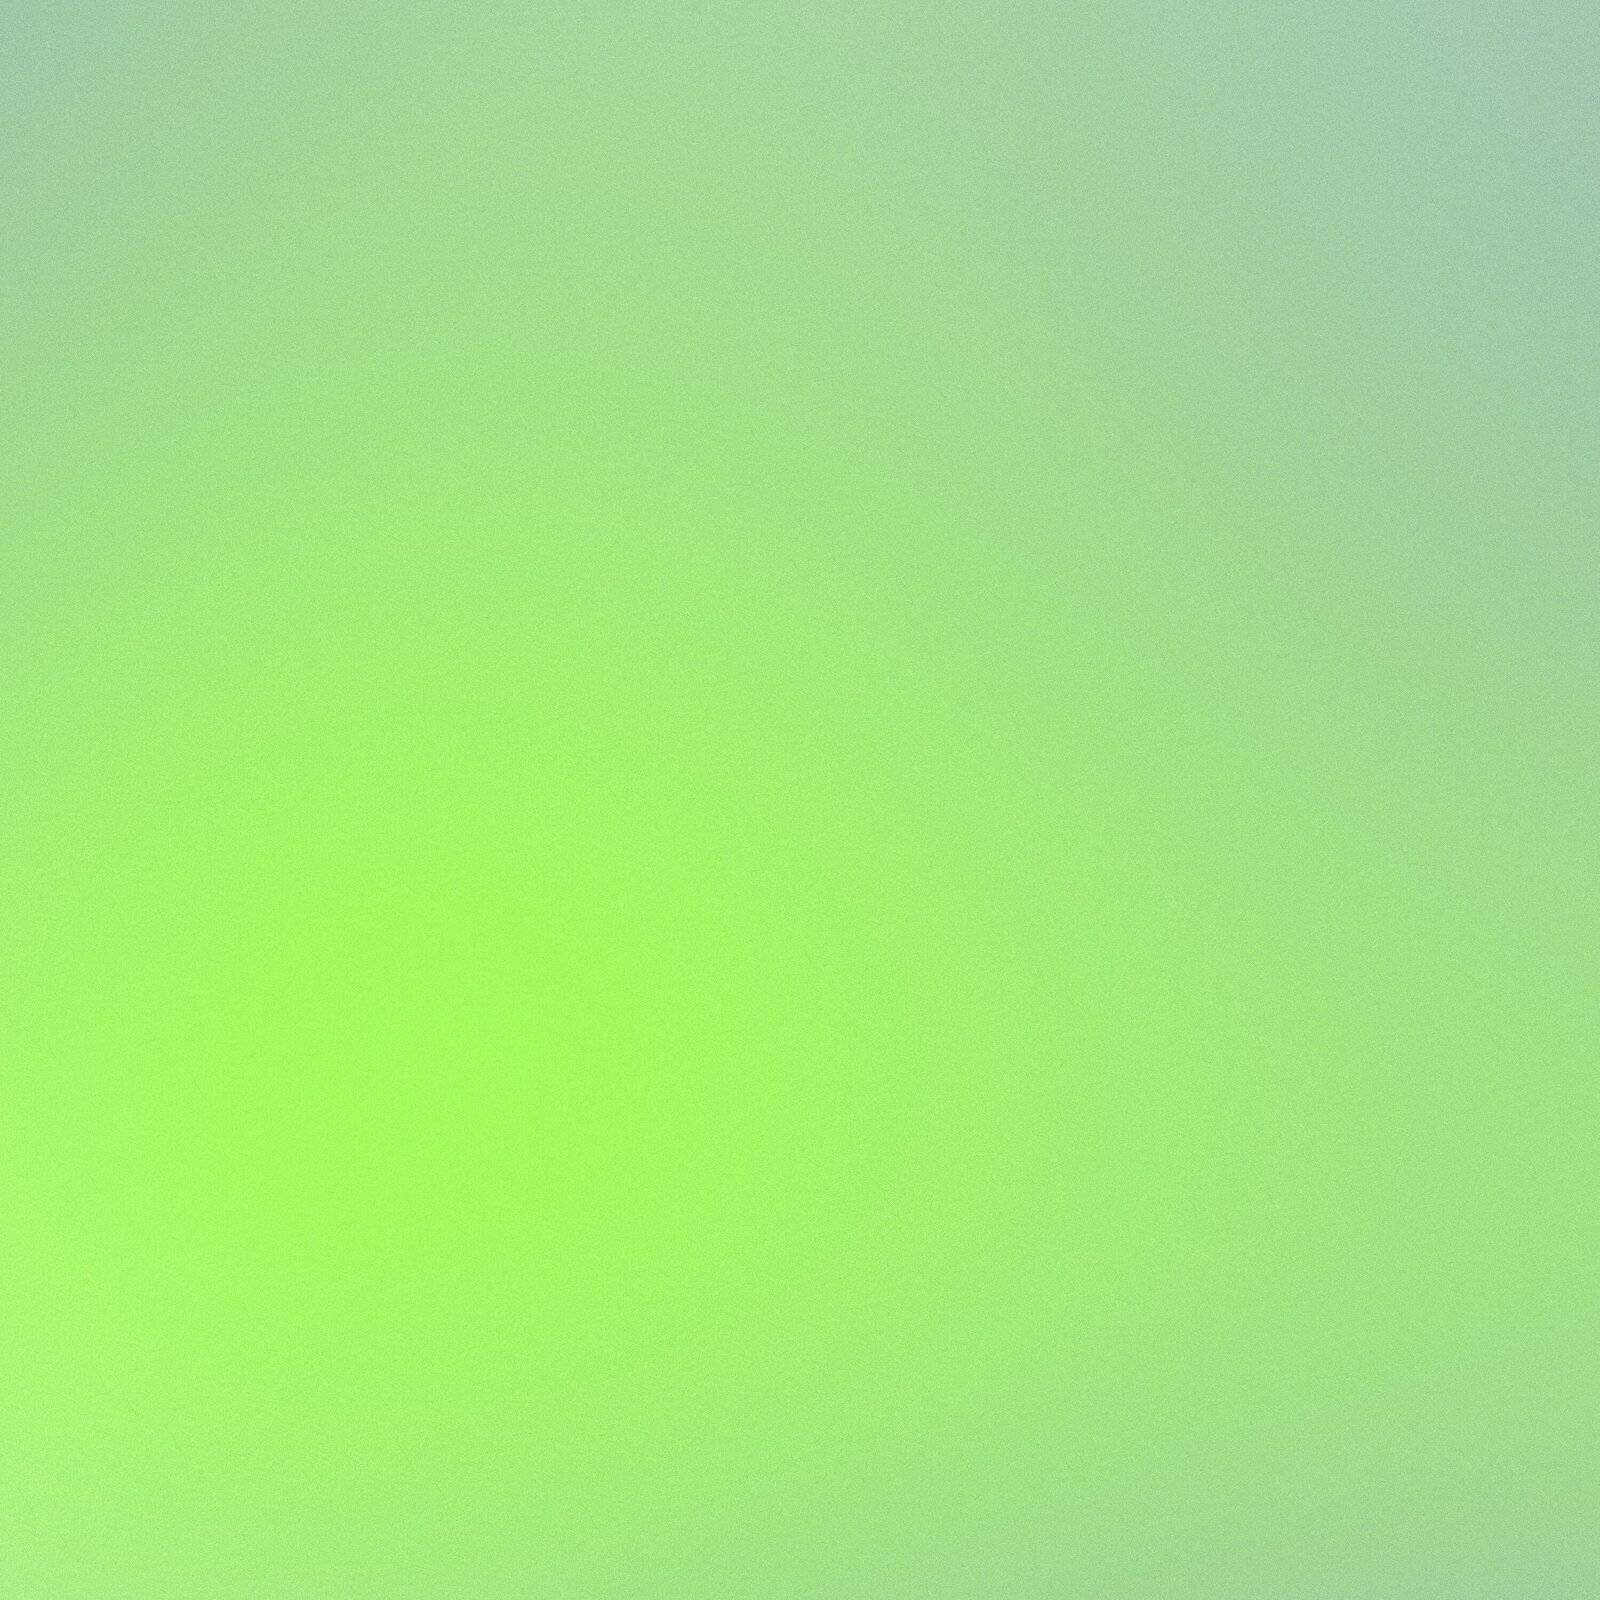 Lime green and grey noise background